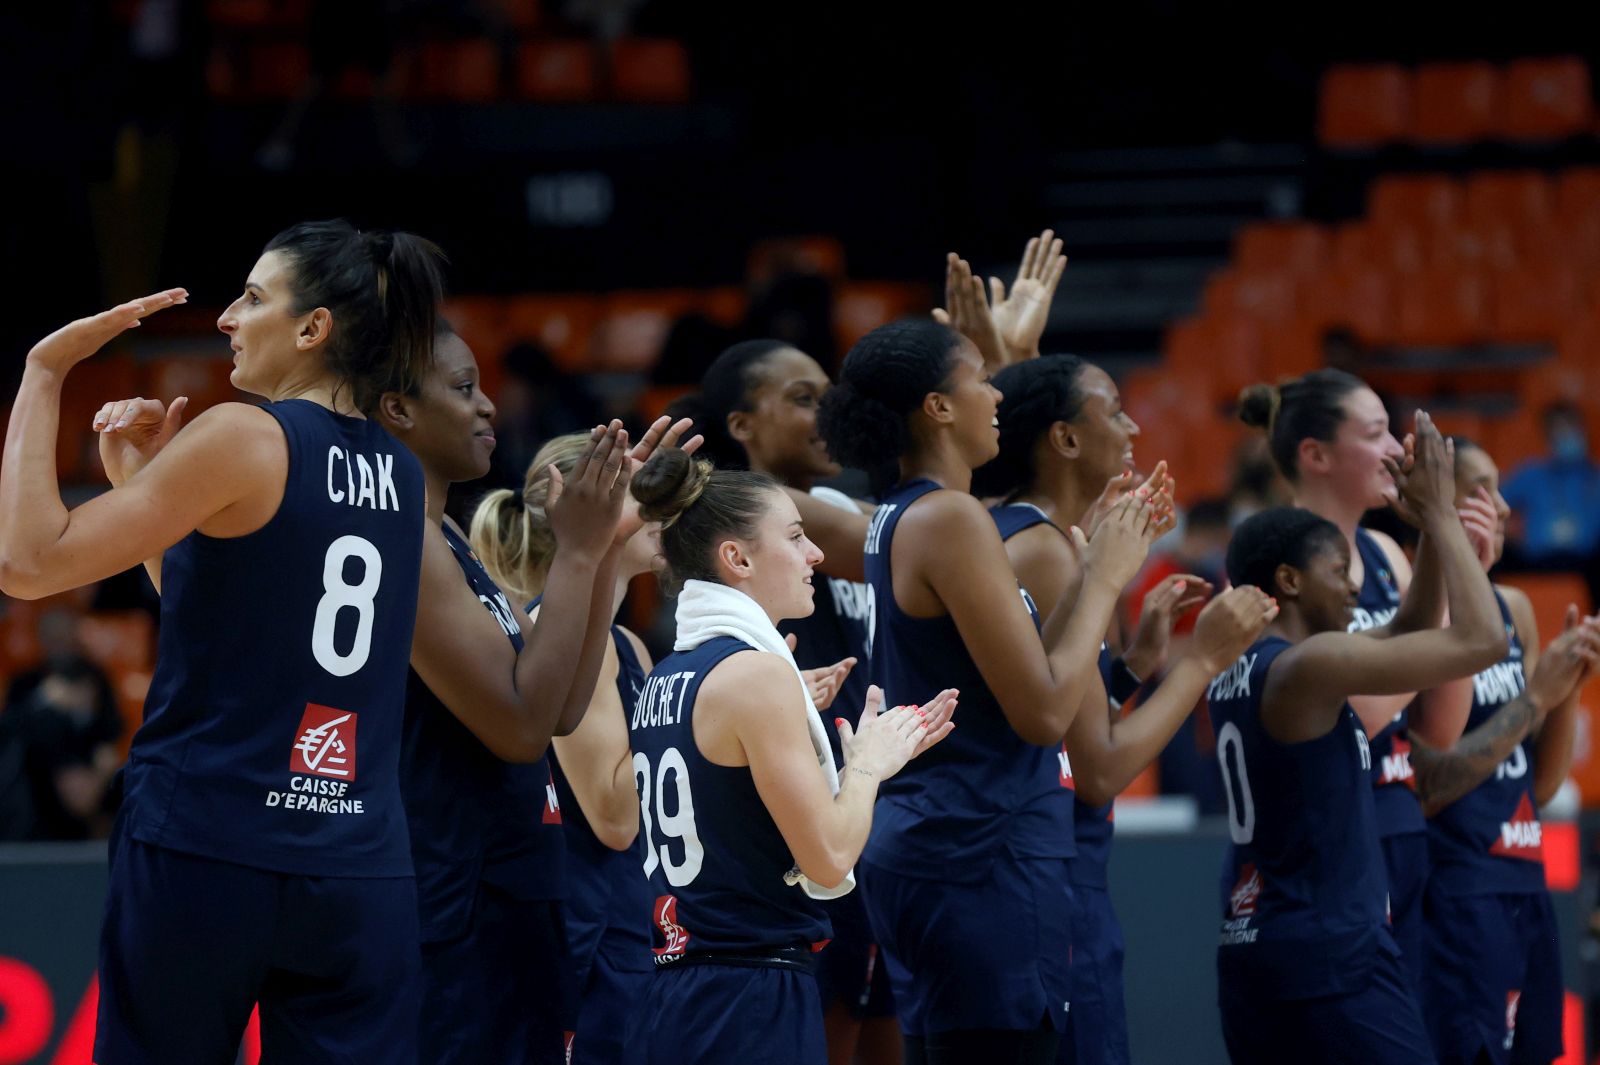 epa09303729 France's players celebrate their victory against France during the Eurobasket 2021 women's semifinal basketball match between Belarus and France held at Fuente San Luis arena in Valencia, Spain, 26 June 2021.  EPA/Kai Forsterling